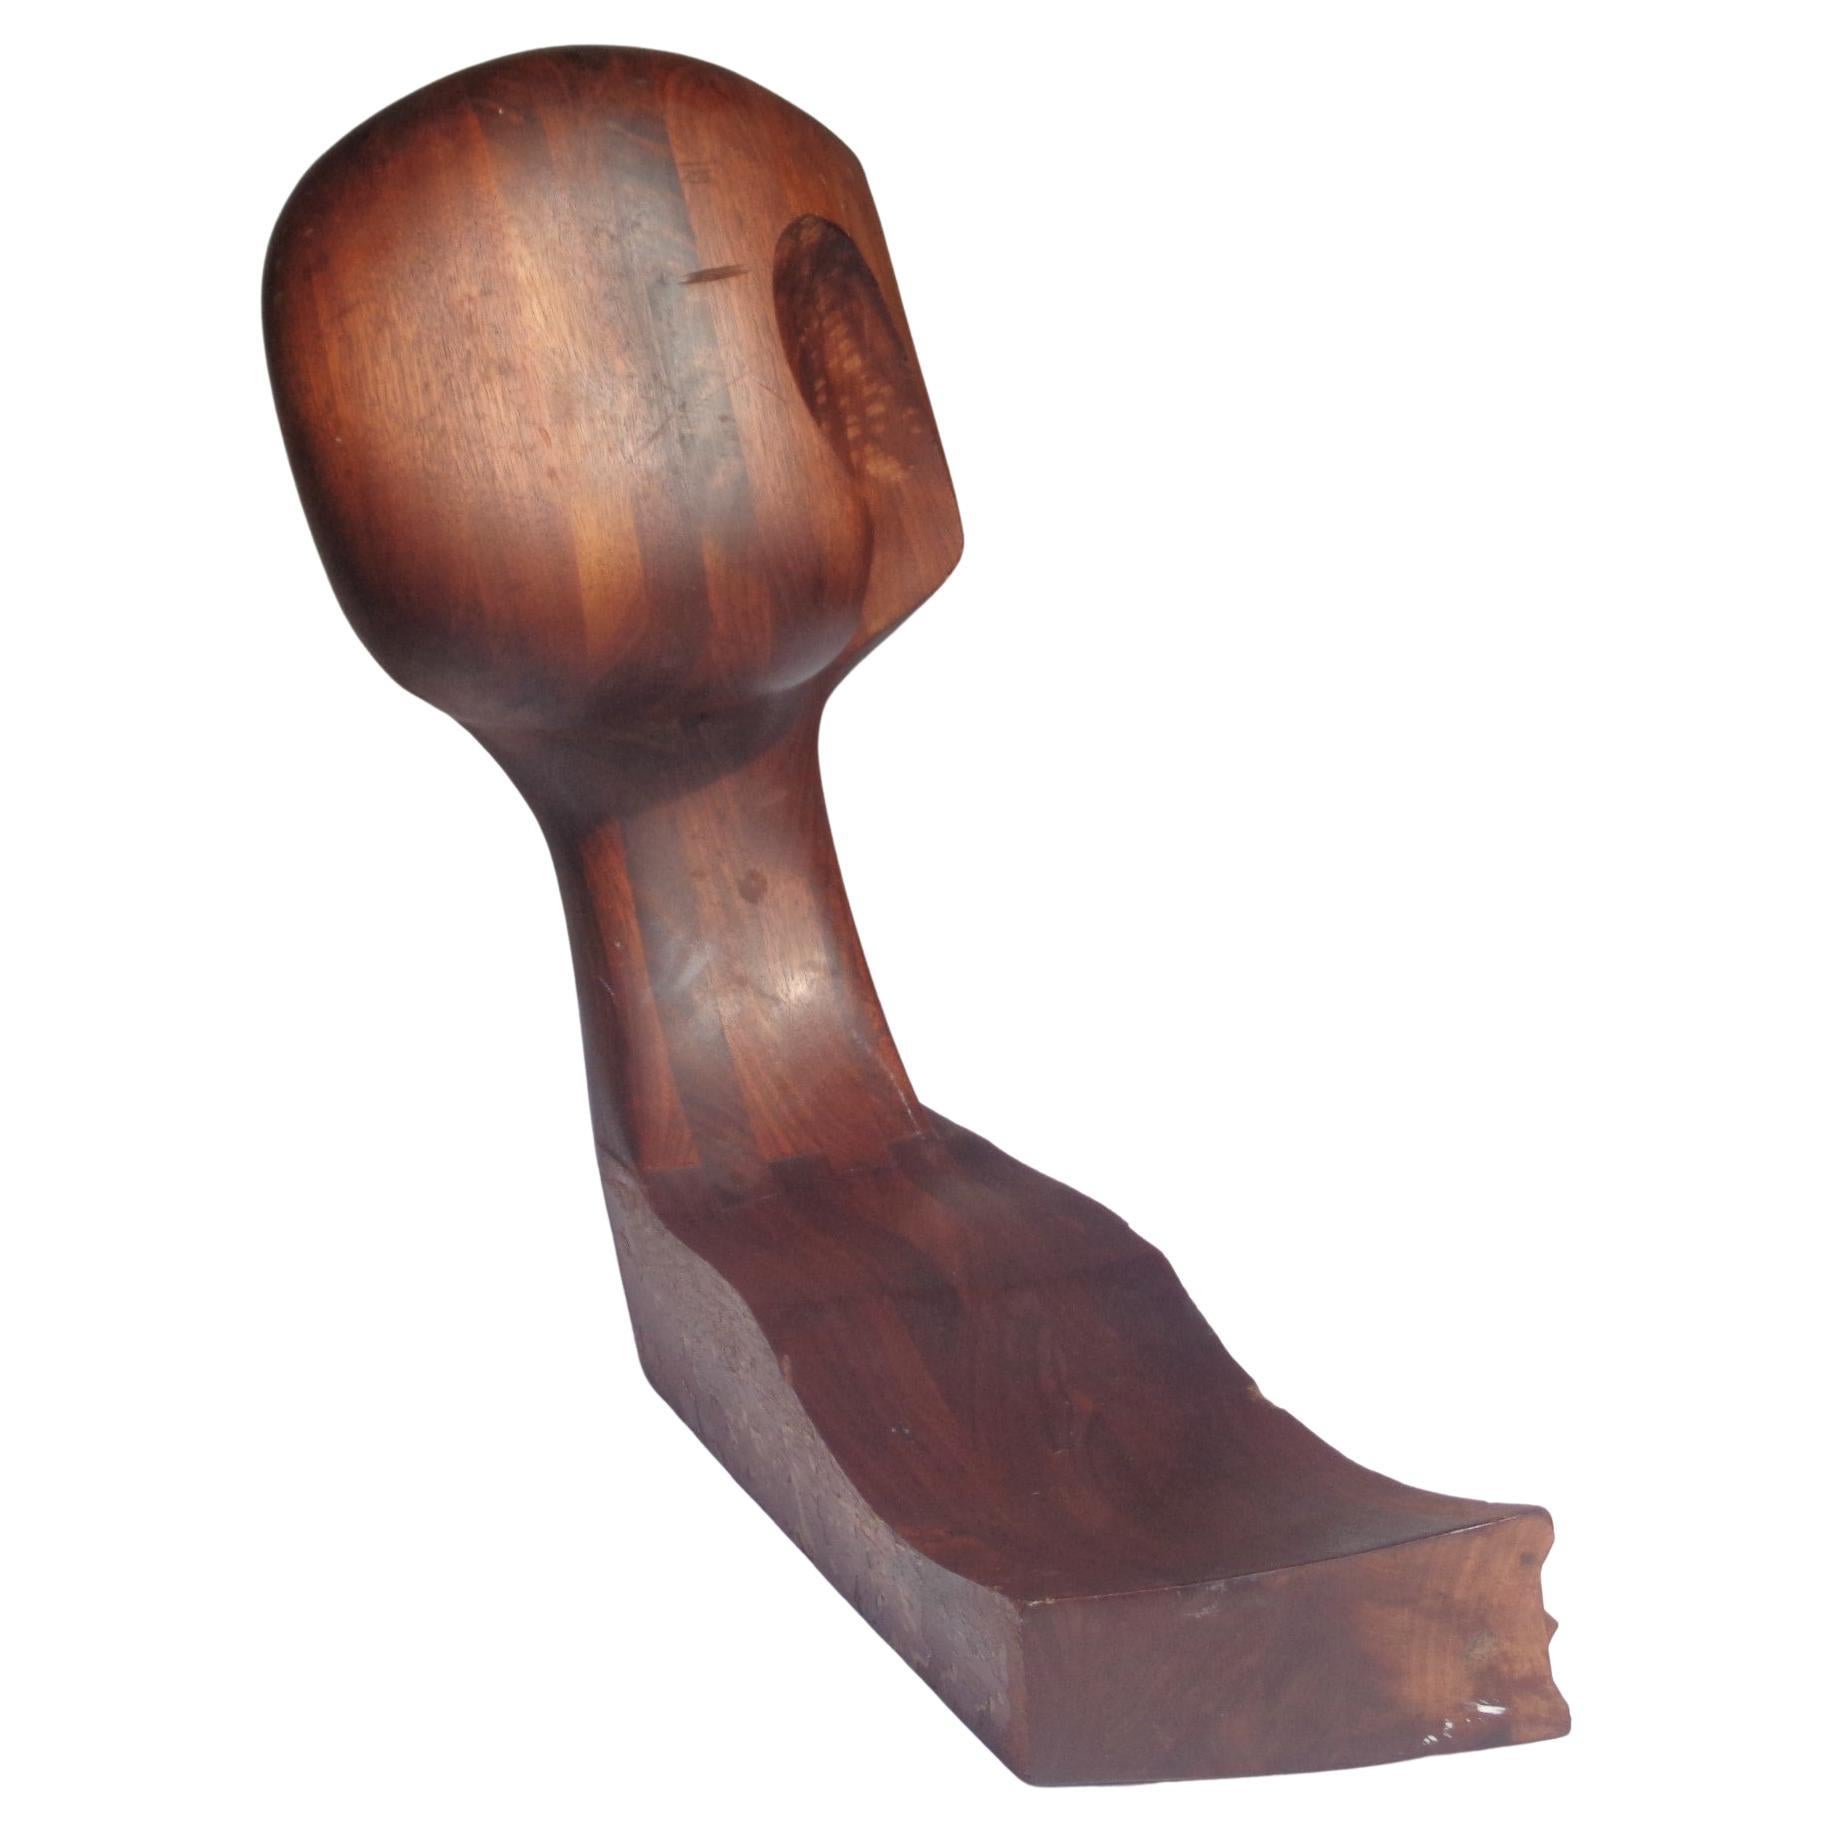 American Studio Craft Movement Abstract Sculpture Wood Bust, 1970-1980 For Sale 3